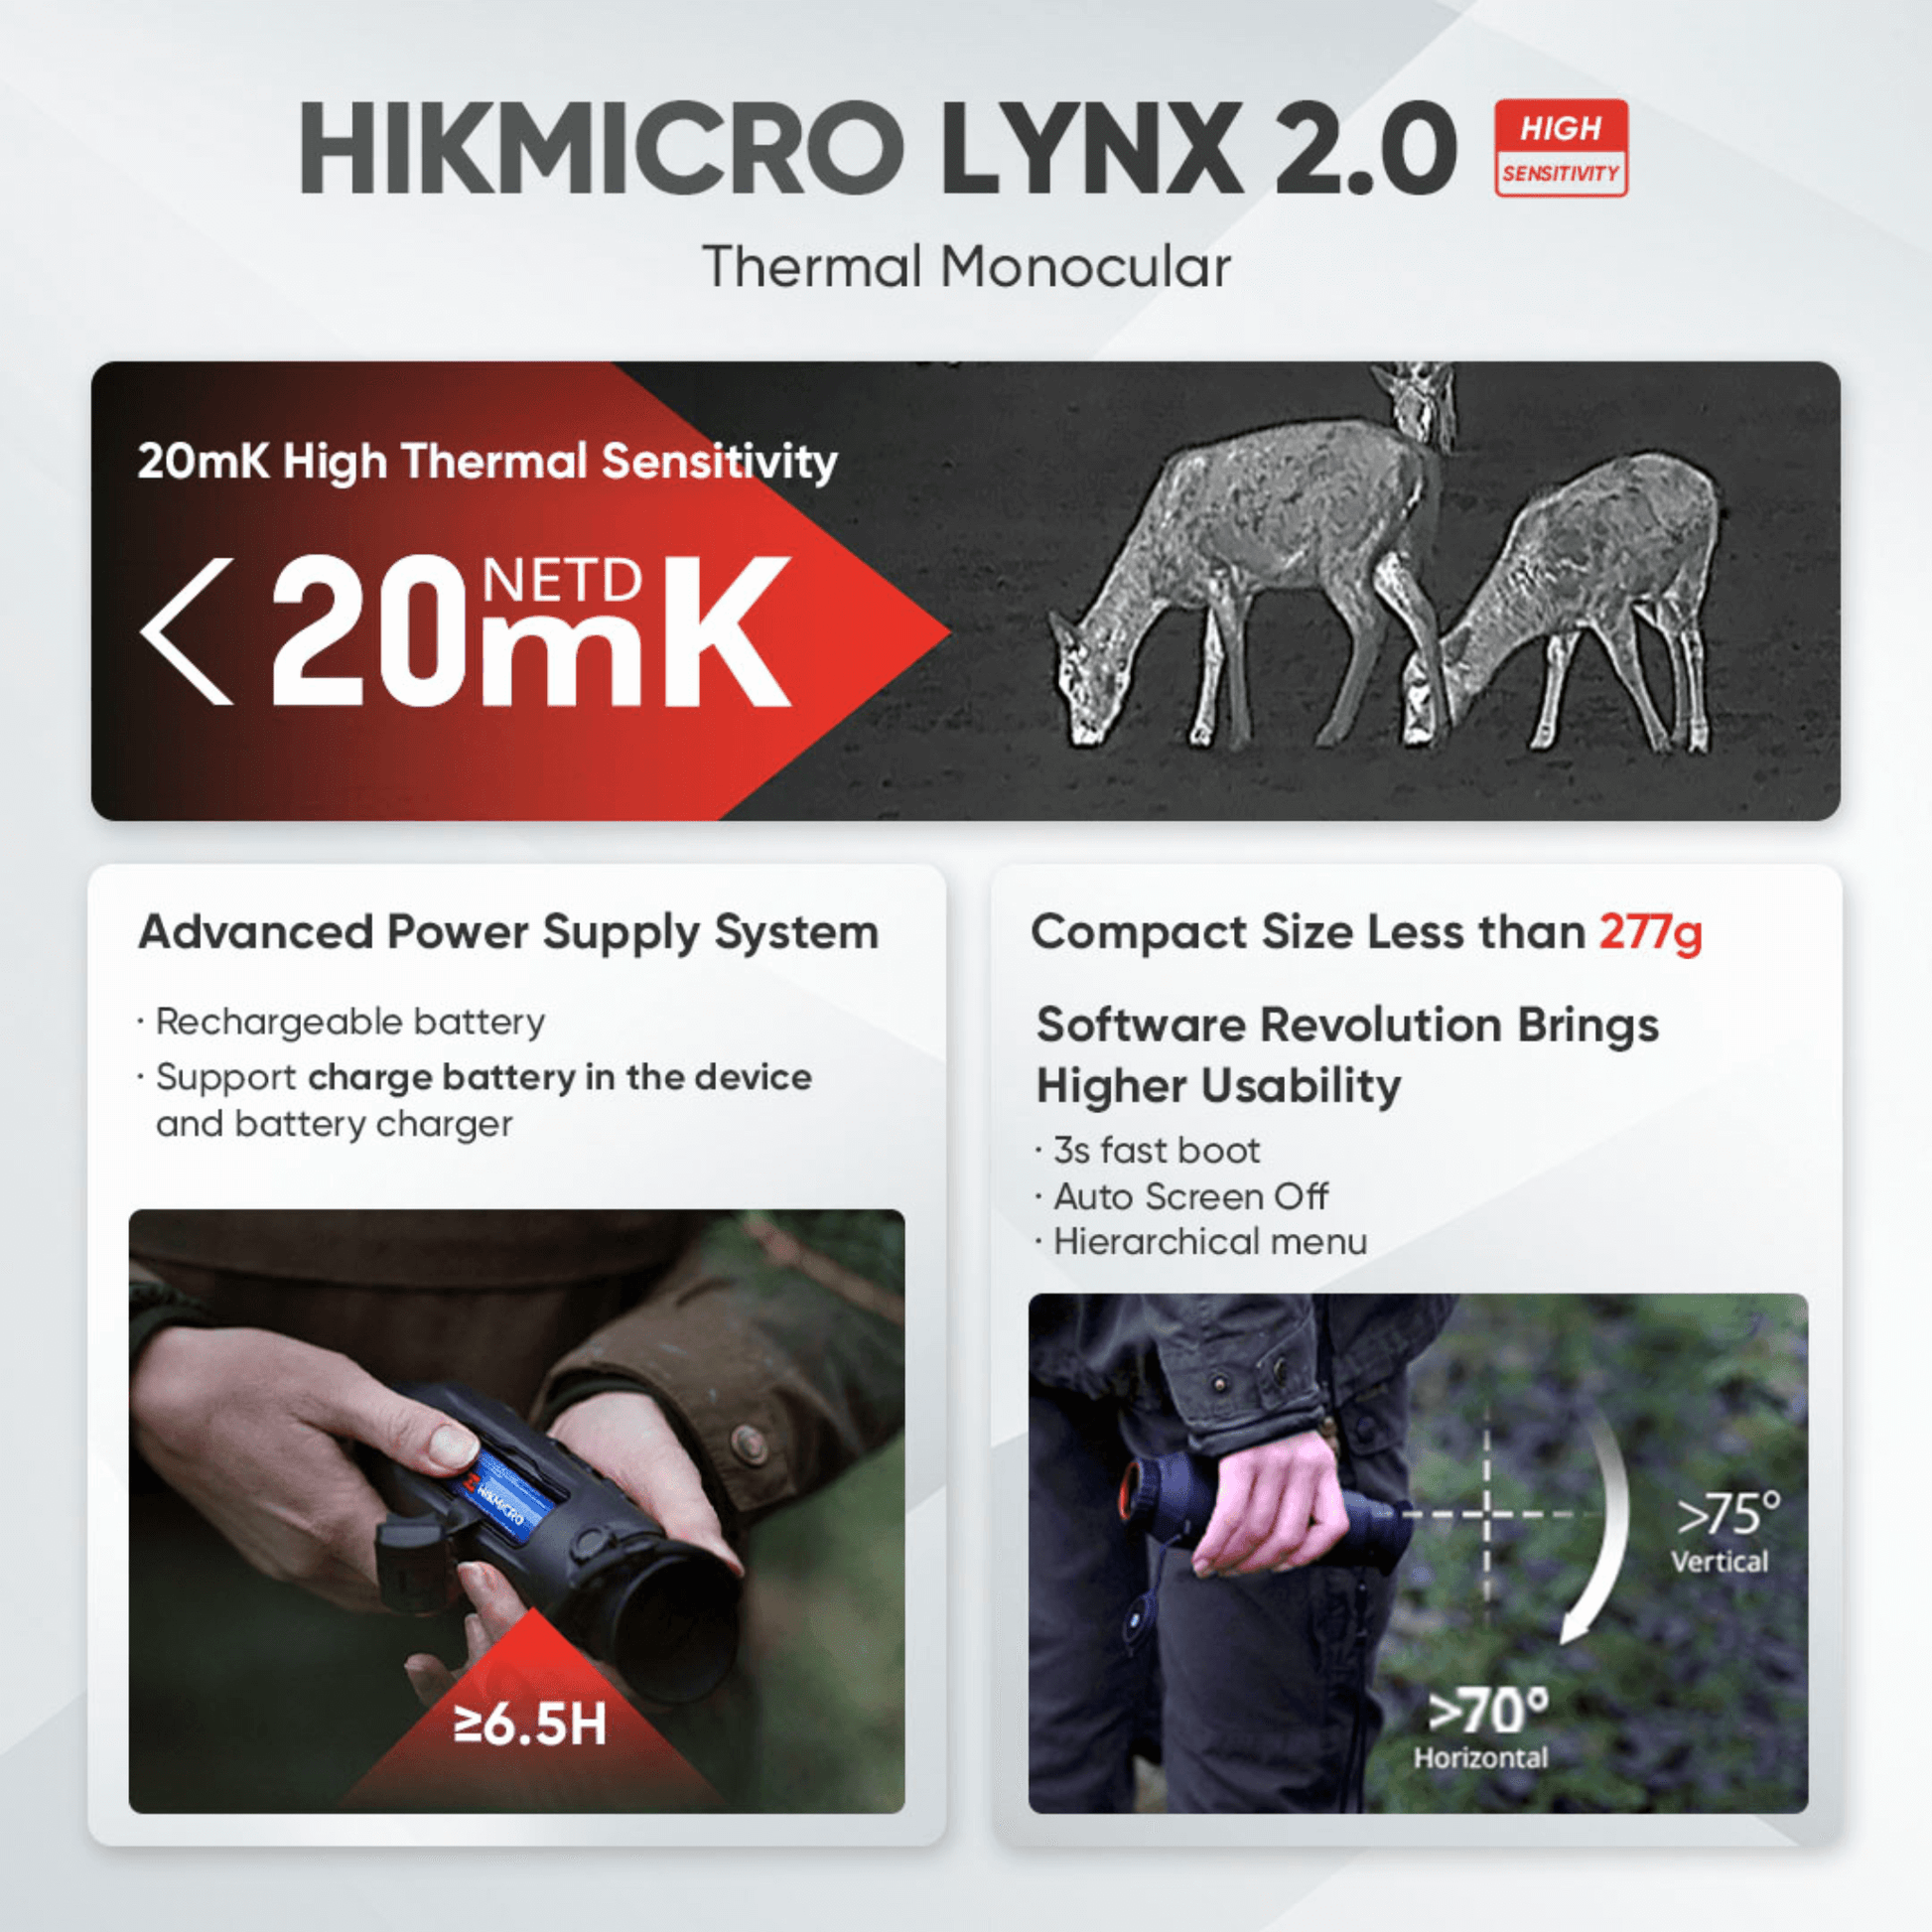 Lynx LH19 2.0 Handheld Thermal Spotter Product Feature Summary